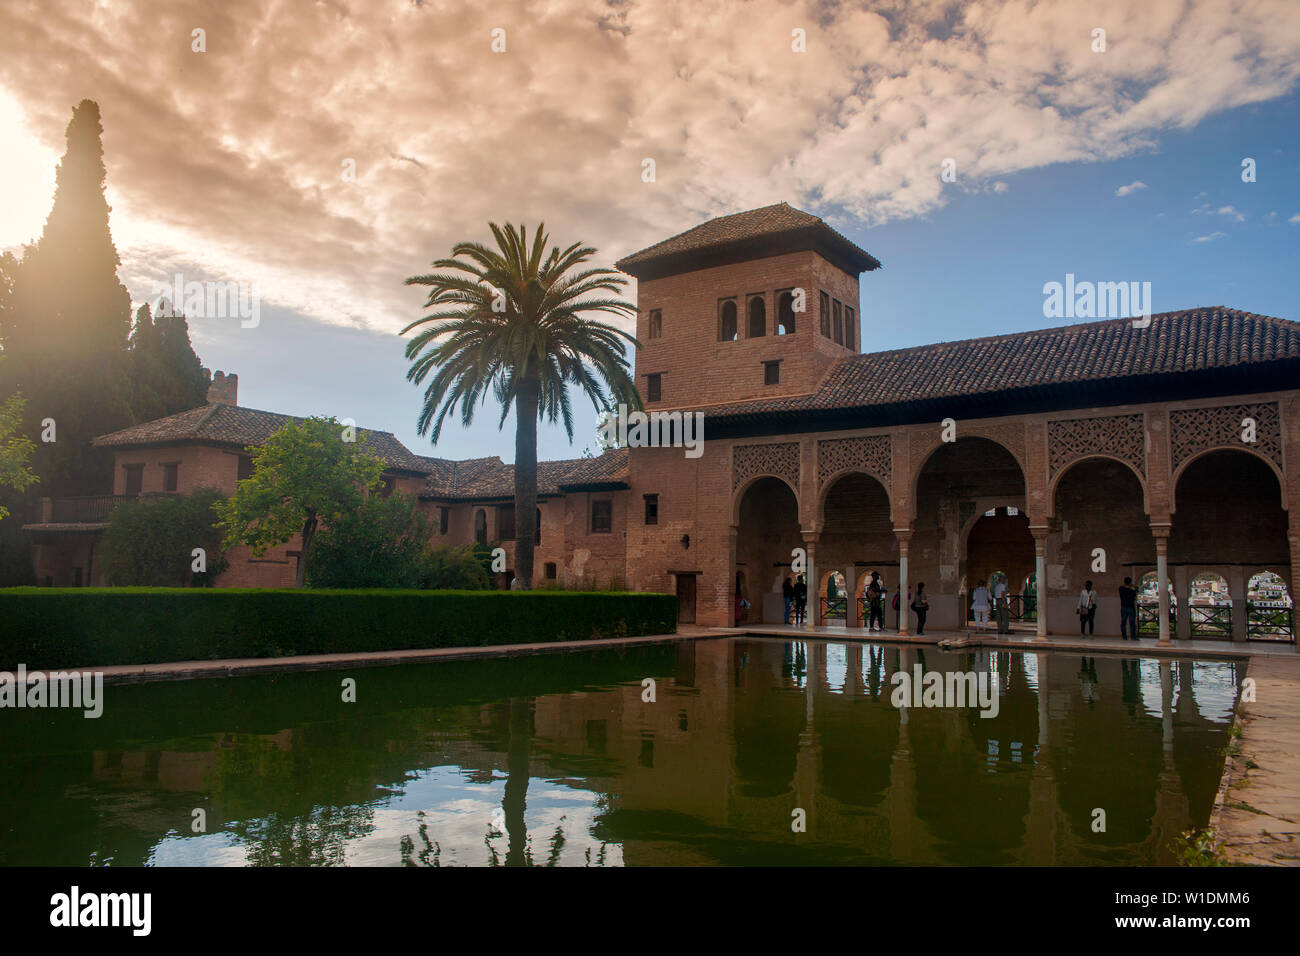 Garden of the Nasrid palaces of the Alhambra of Granada, Spain Stock Photo